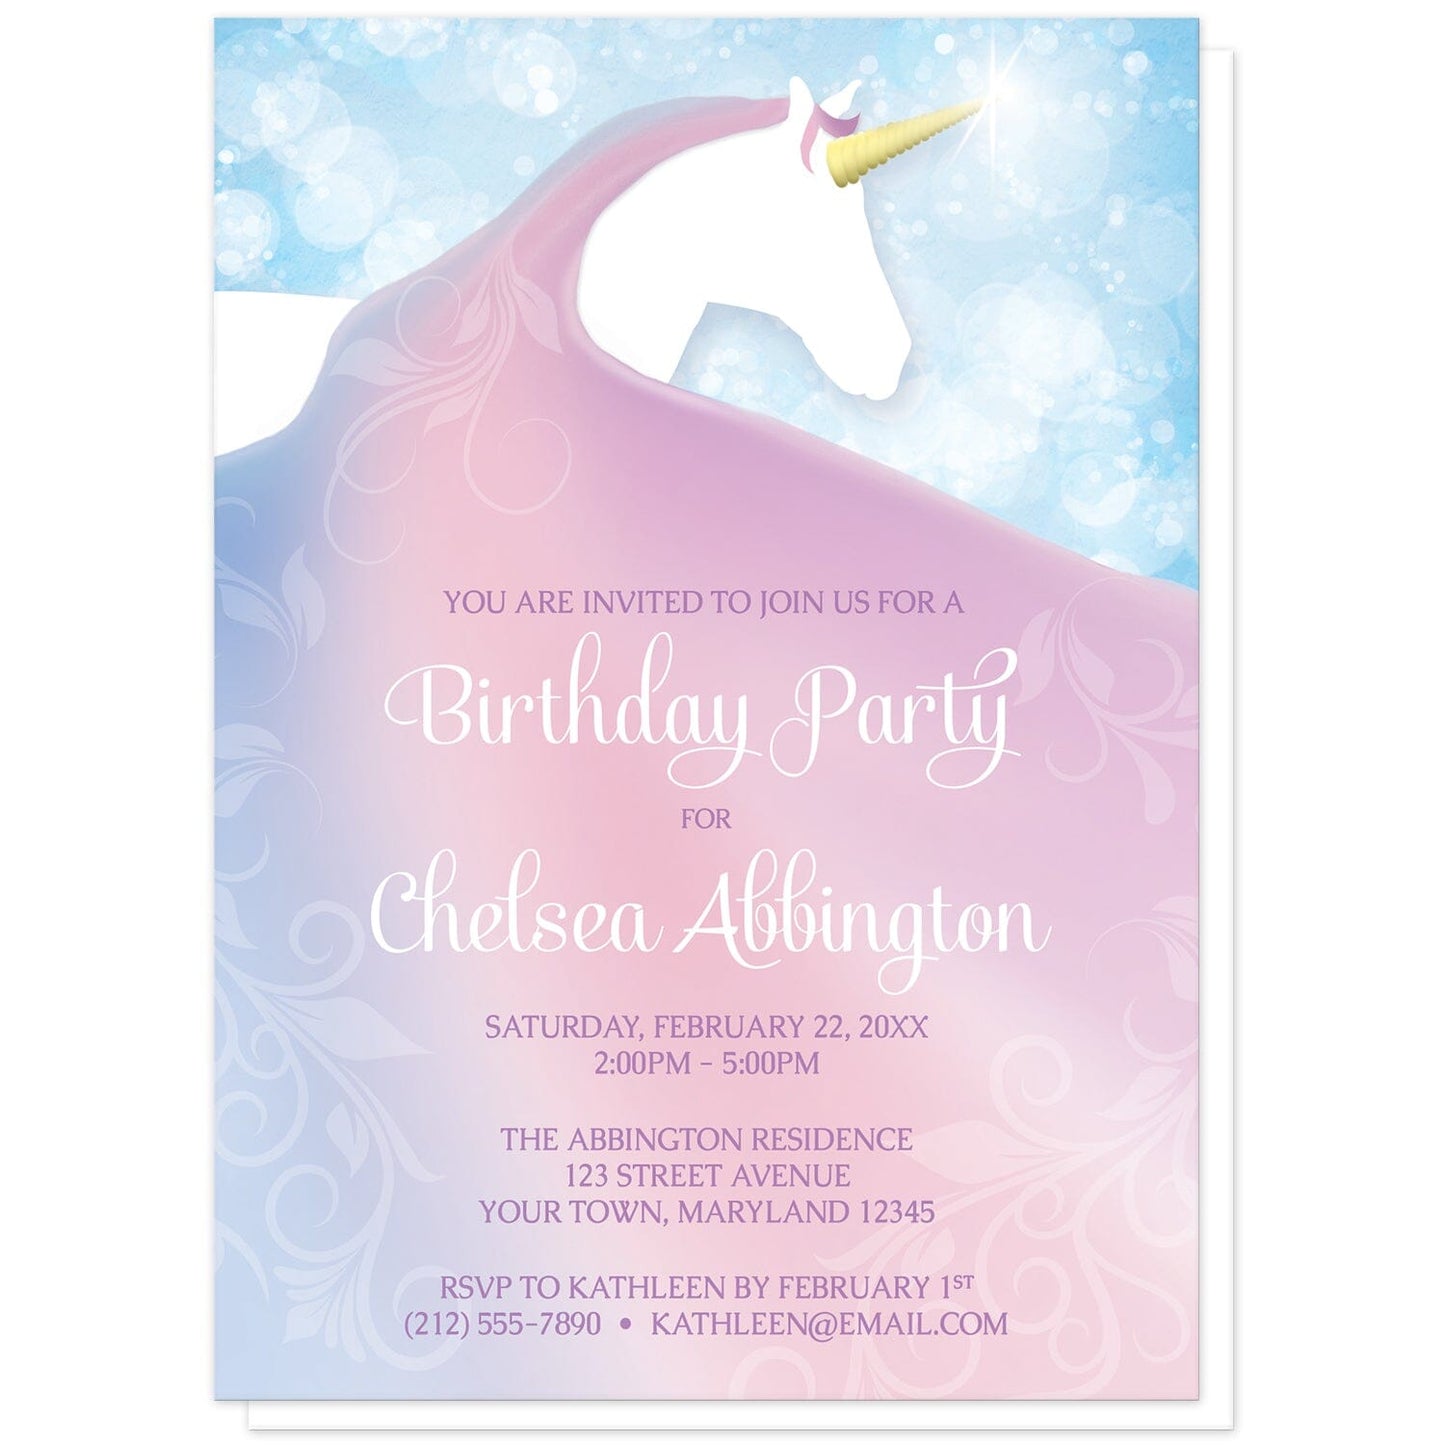 Magical Fairy-tale Unicorn Birthday Party Invitations at Artistically Invited. Uniquely illustrated magical fairy-tale unicorn birthday party invitations with a white silhouette unicorn with a golden horn and a long flowing mane in a pink, blue, and purple gradient design. The personalized information you provide for your birthday party details will be custom printed in white and light purple over the colorful unicorn mane. Behind the unicorn is a magical blue bokeh background design.